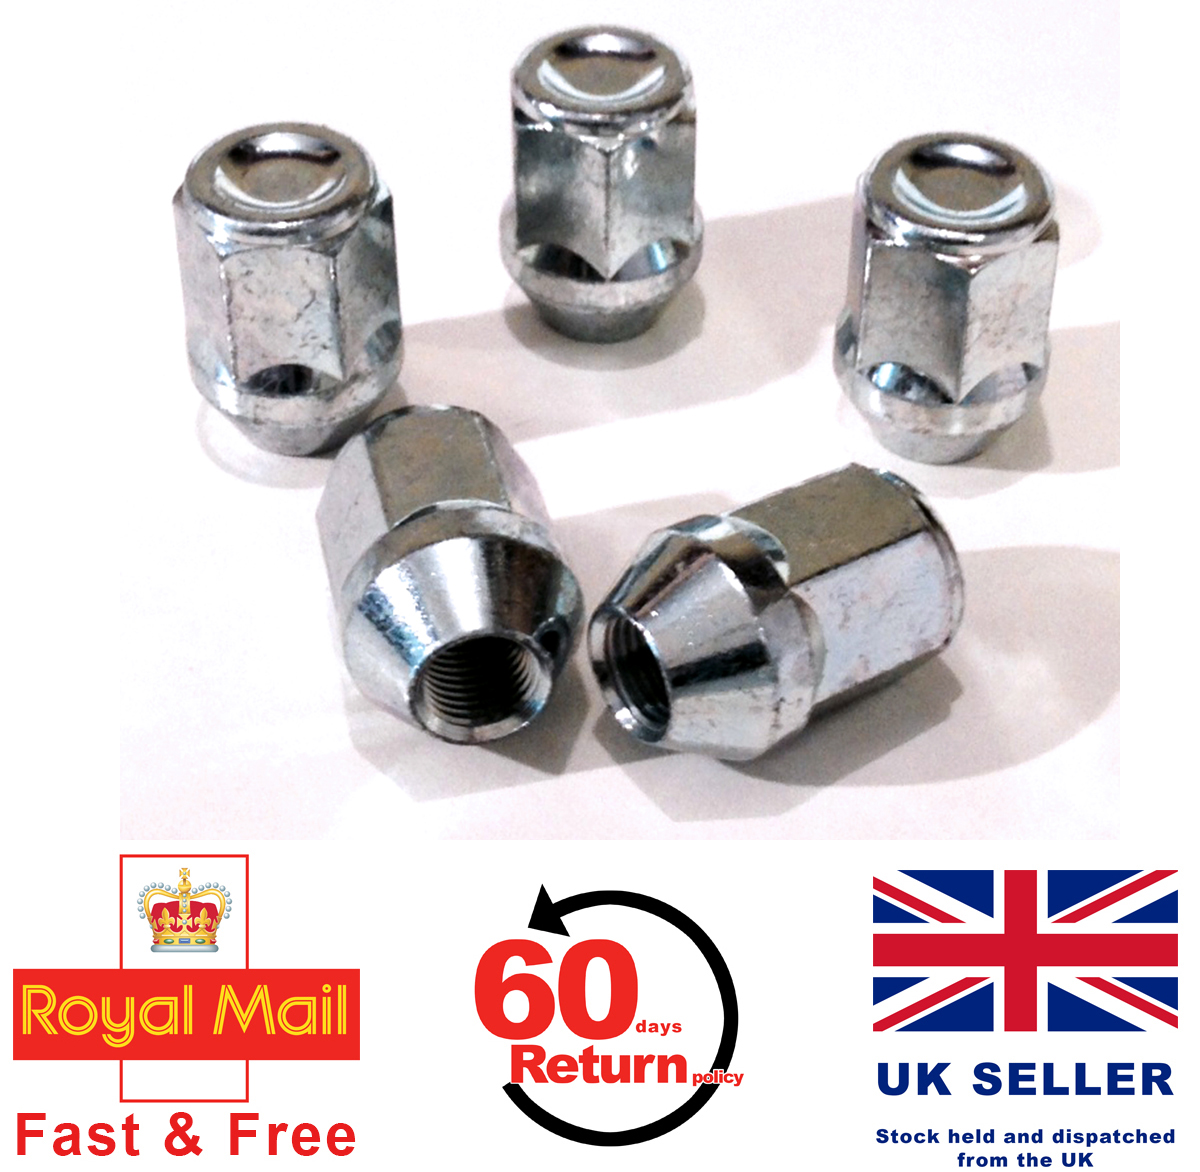 Chrysler VOYAGER alloy wheel nuts M12 x 1.5 taper 19mm Hex